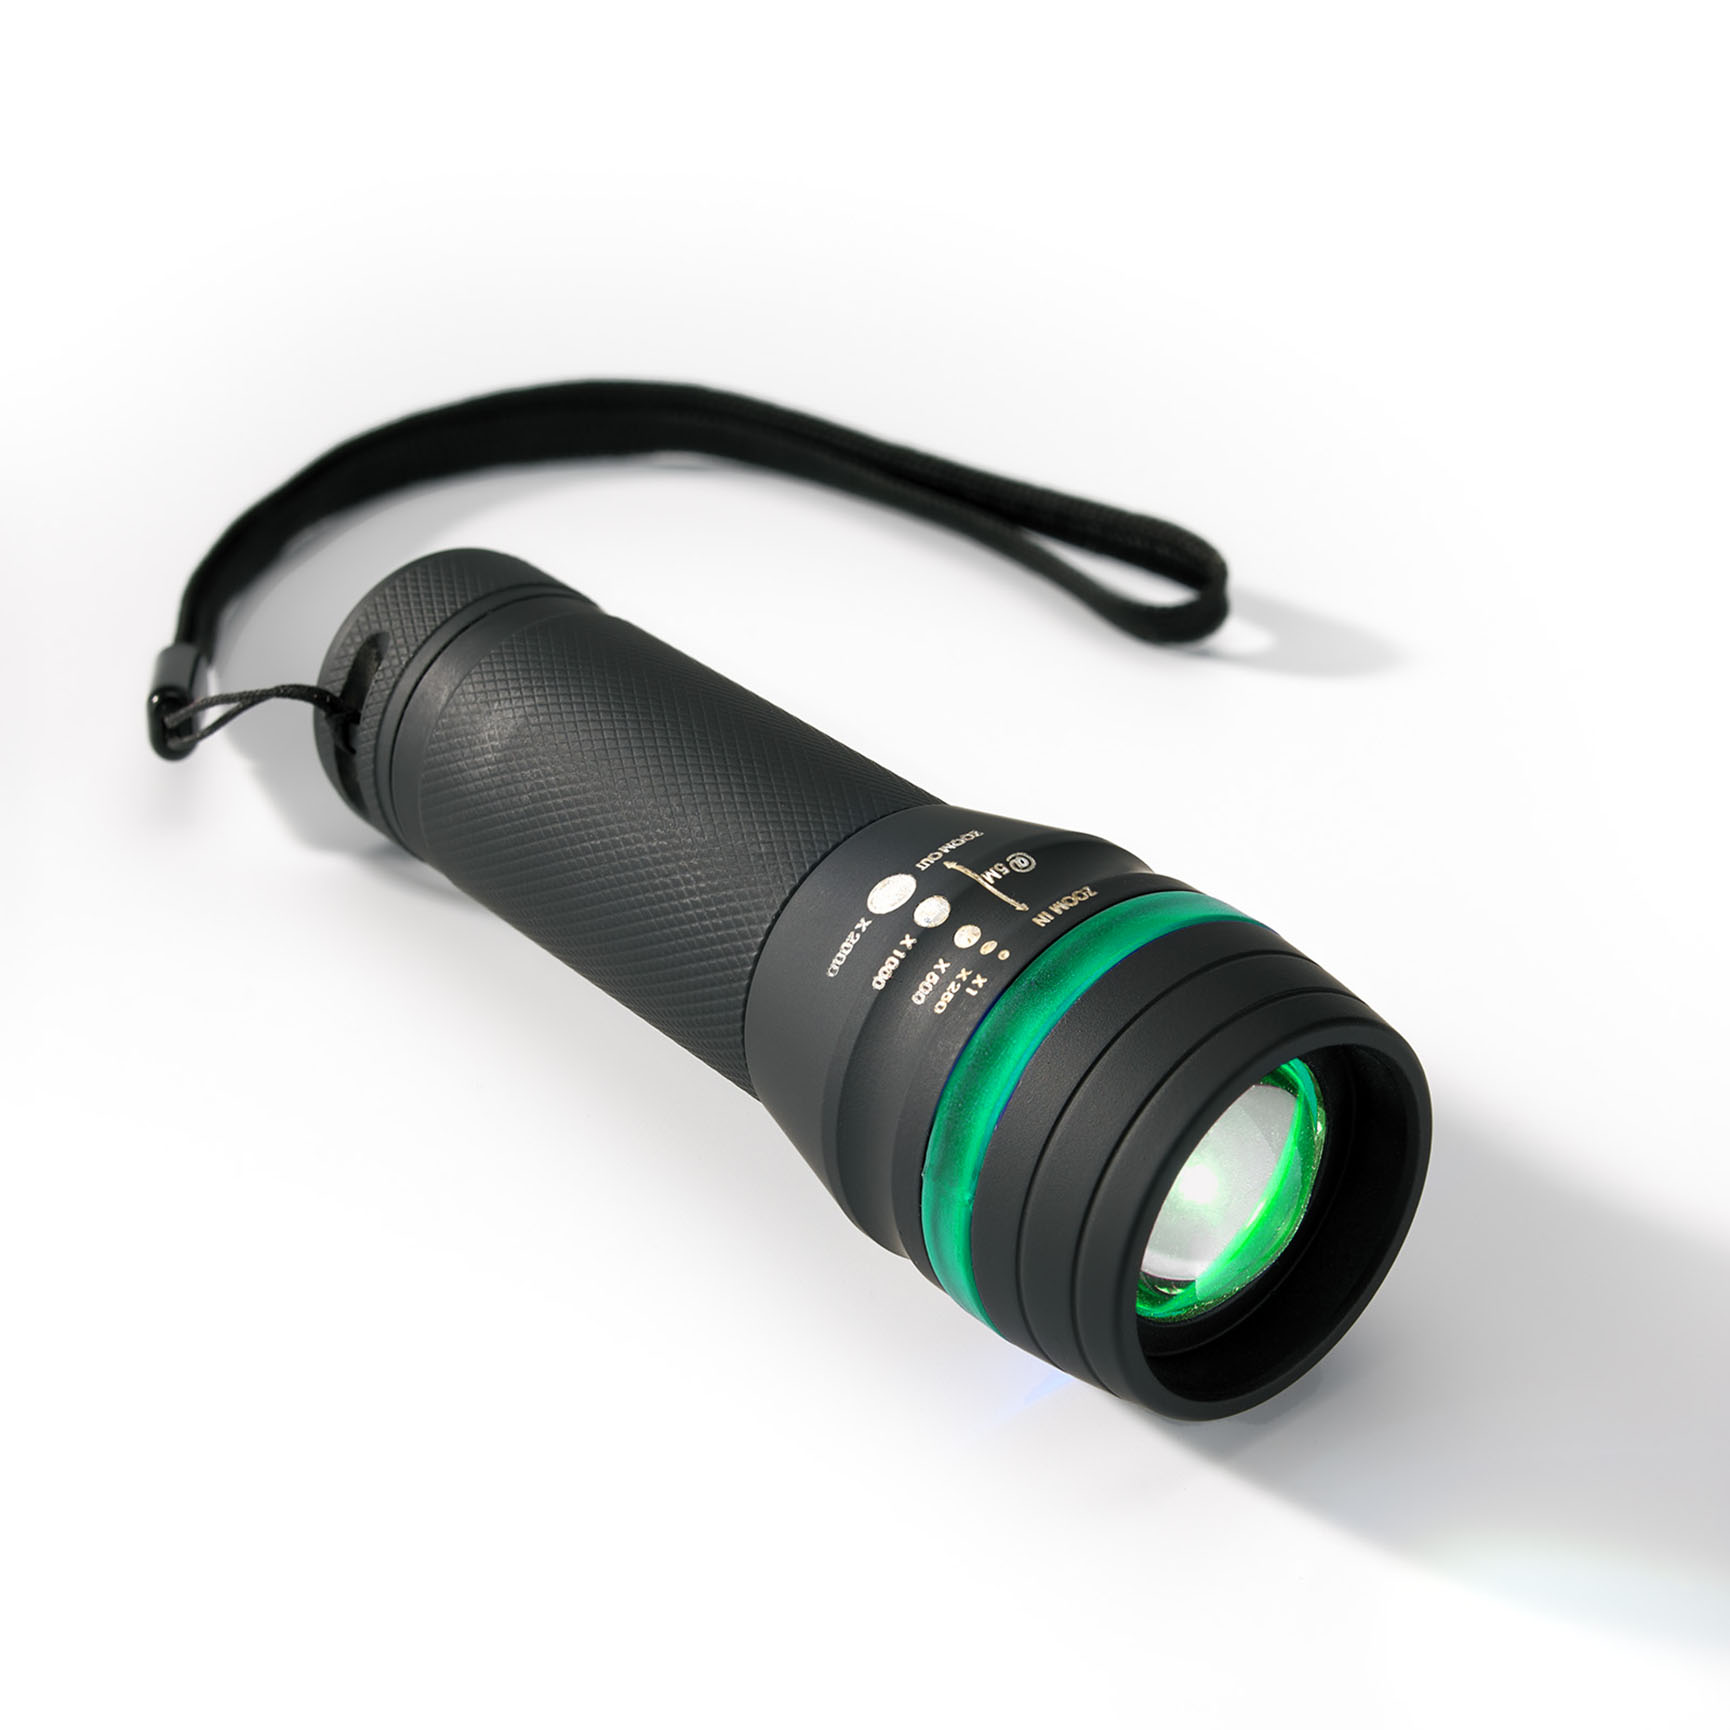 Printed LED TORCH BBY PAINTURISSIMO